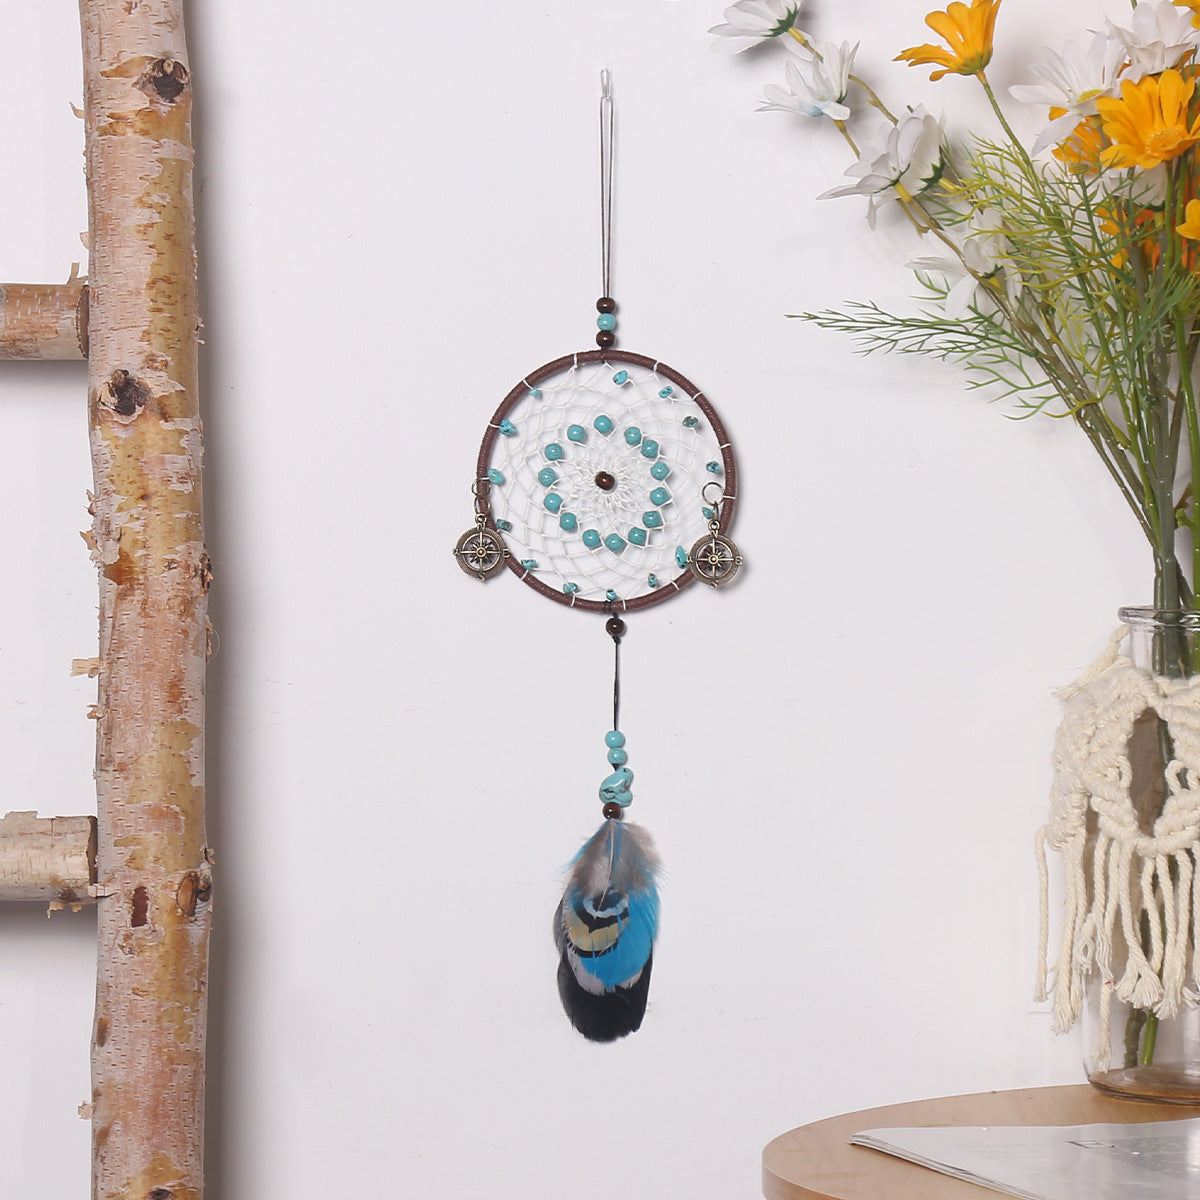 Retro Weave Feather Chime Wall Decoration